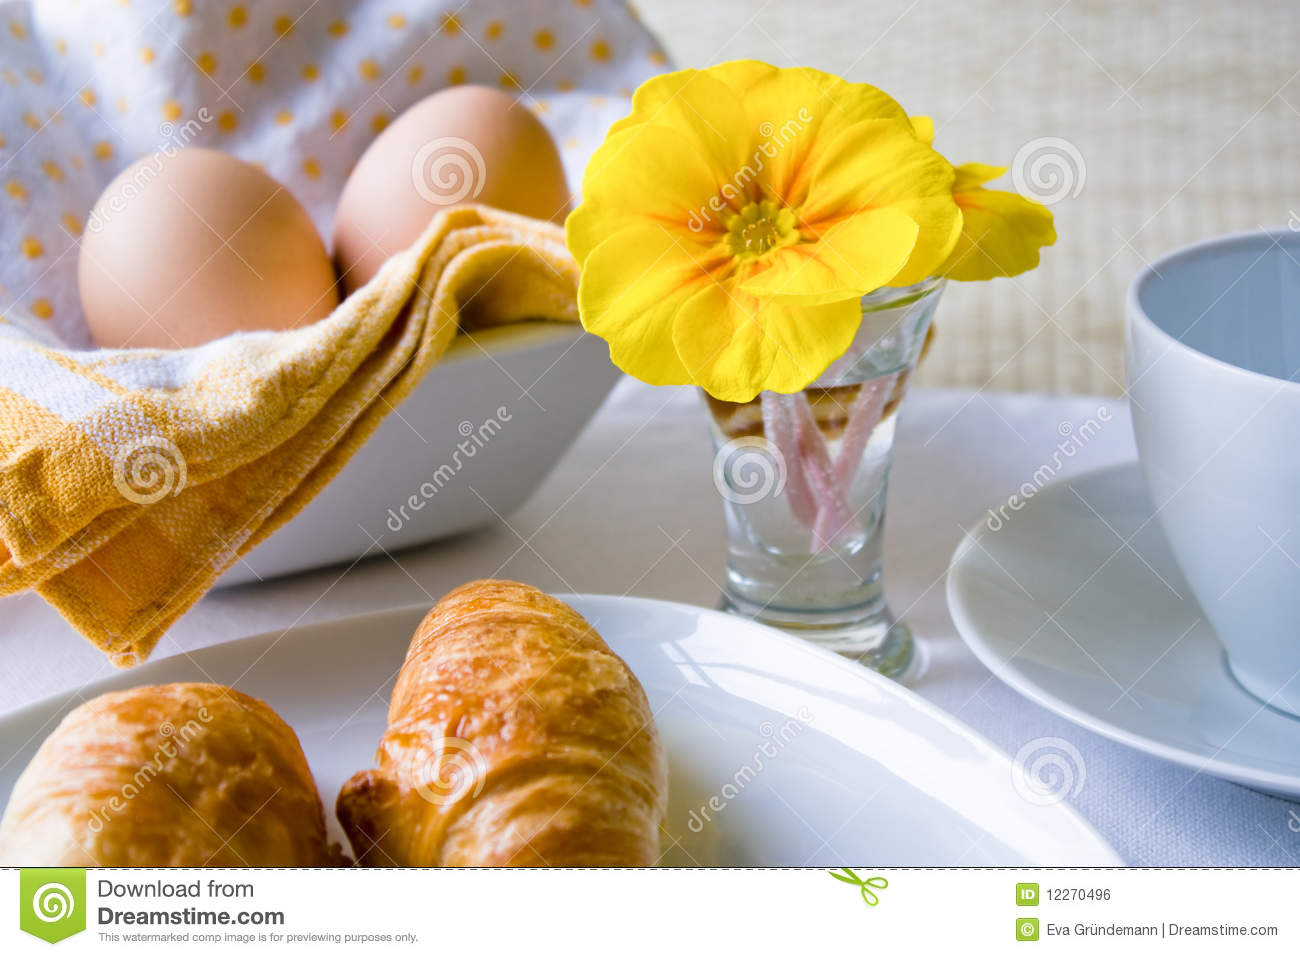 Easter Breakfast In White And Yellow Royalty Free Stock Image   Image